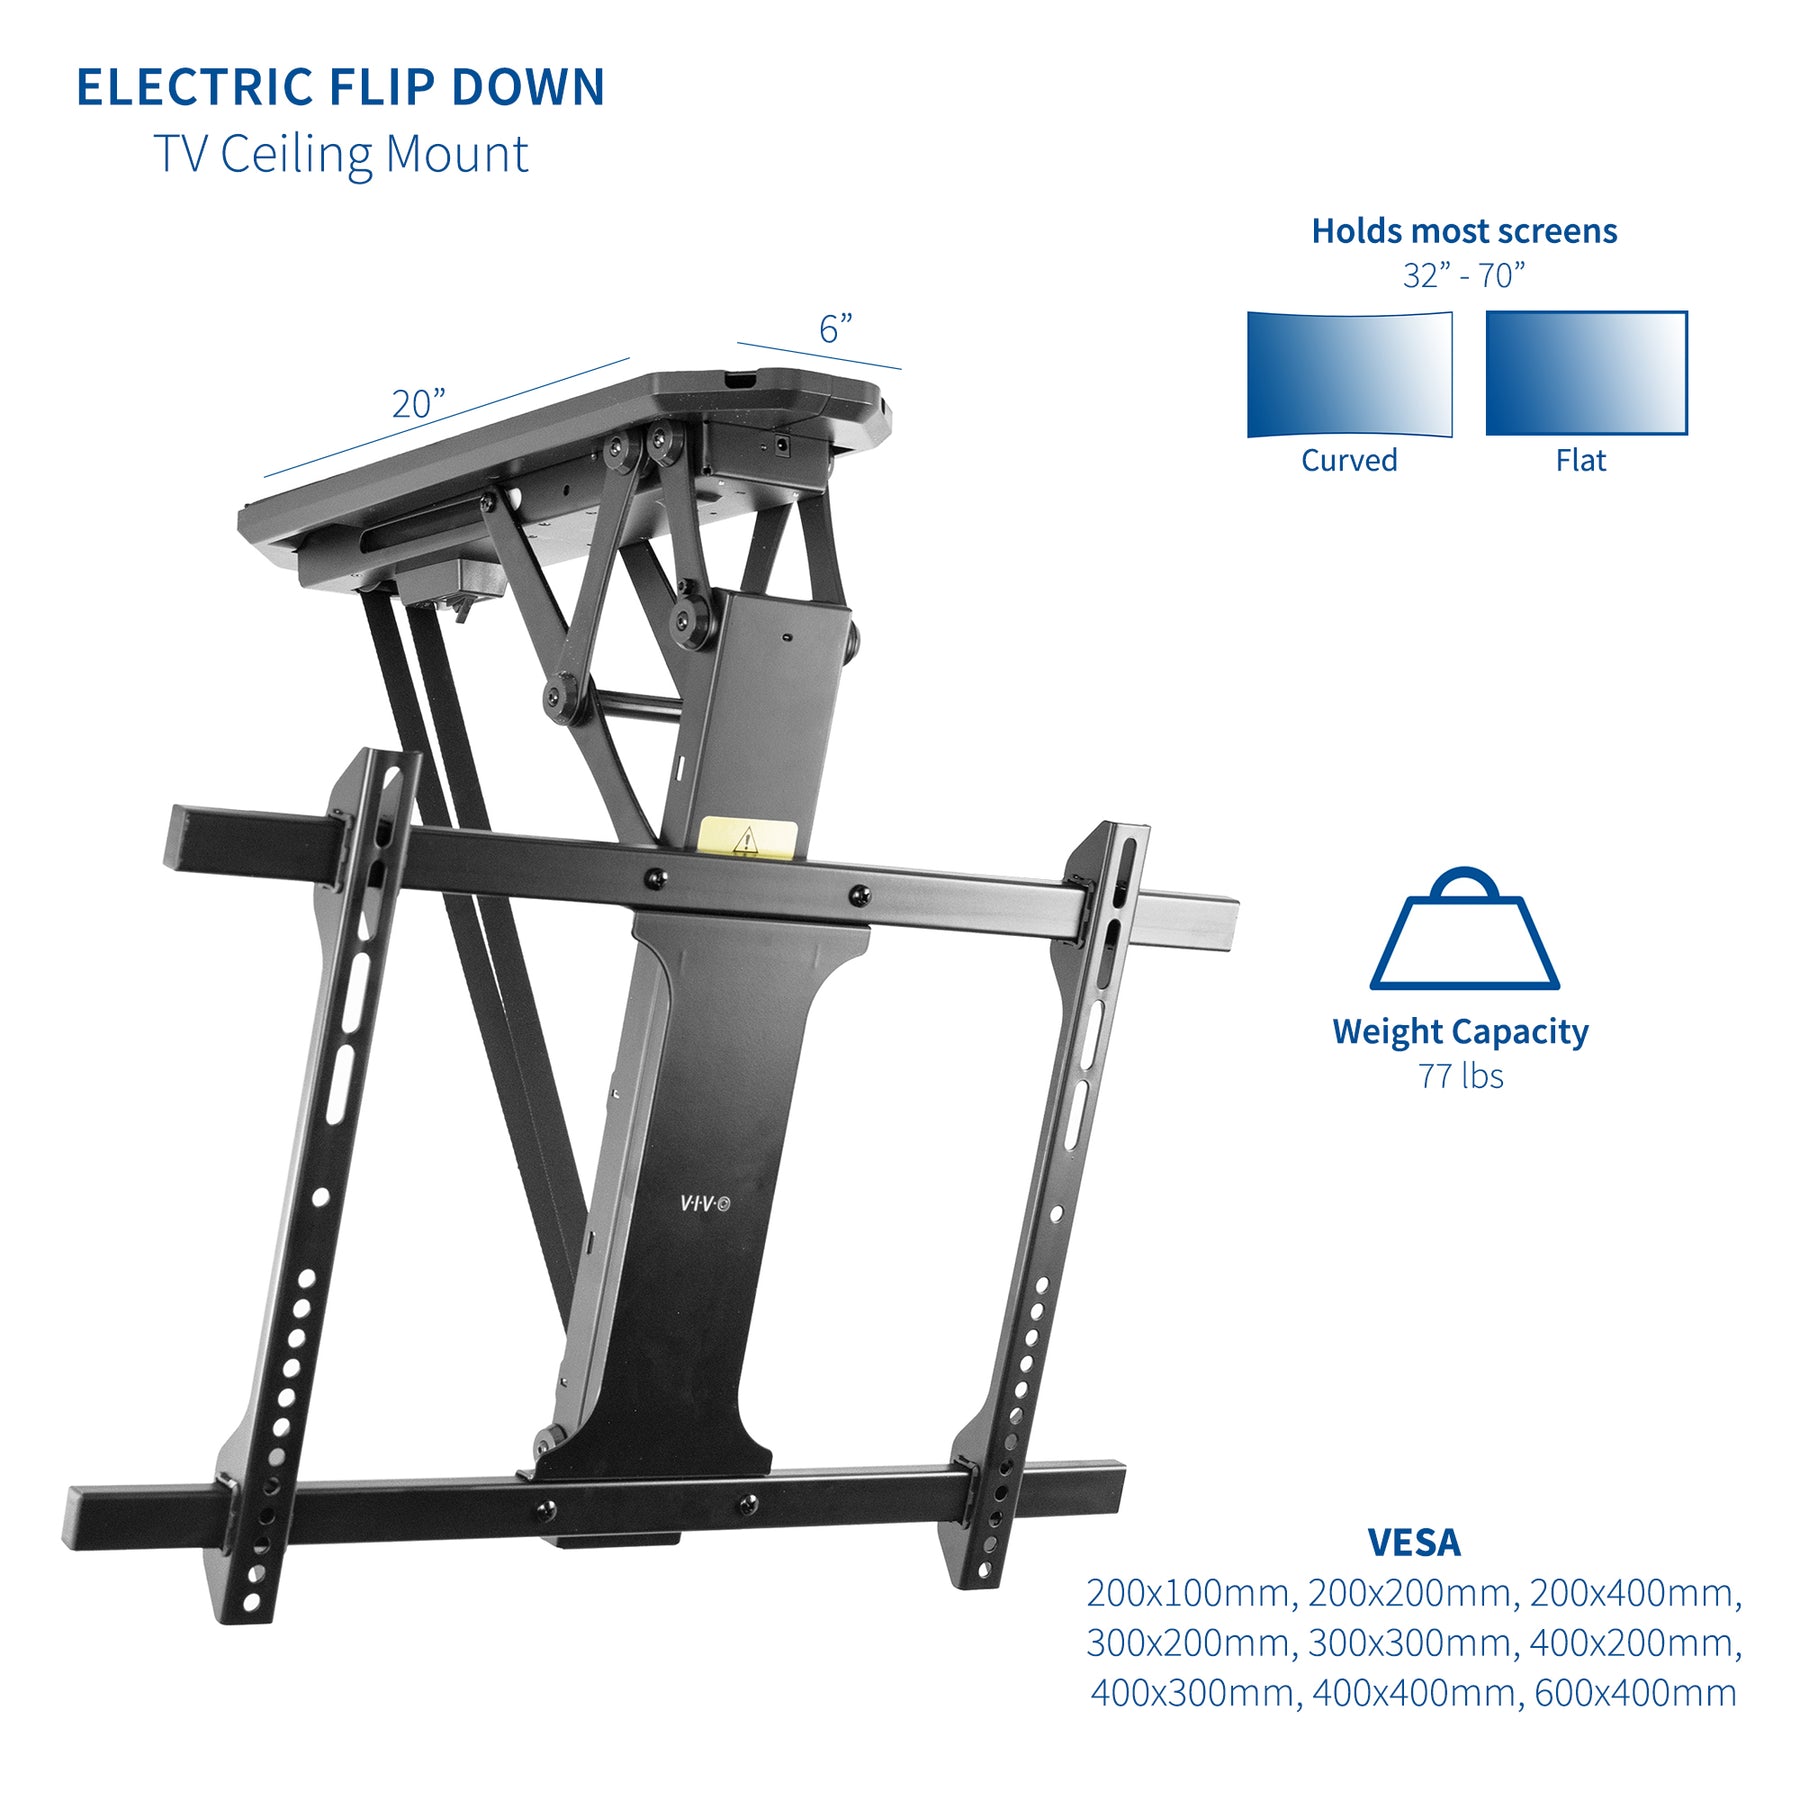 Electric Flip Down Ceiling Mount For 32